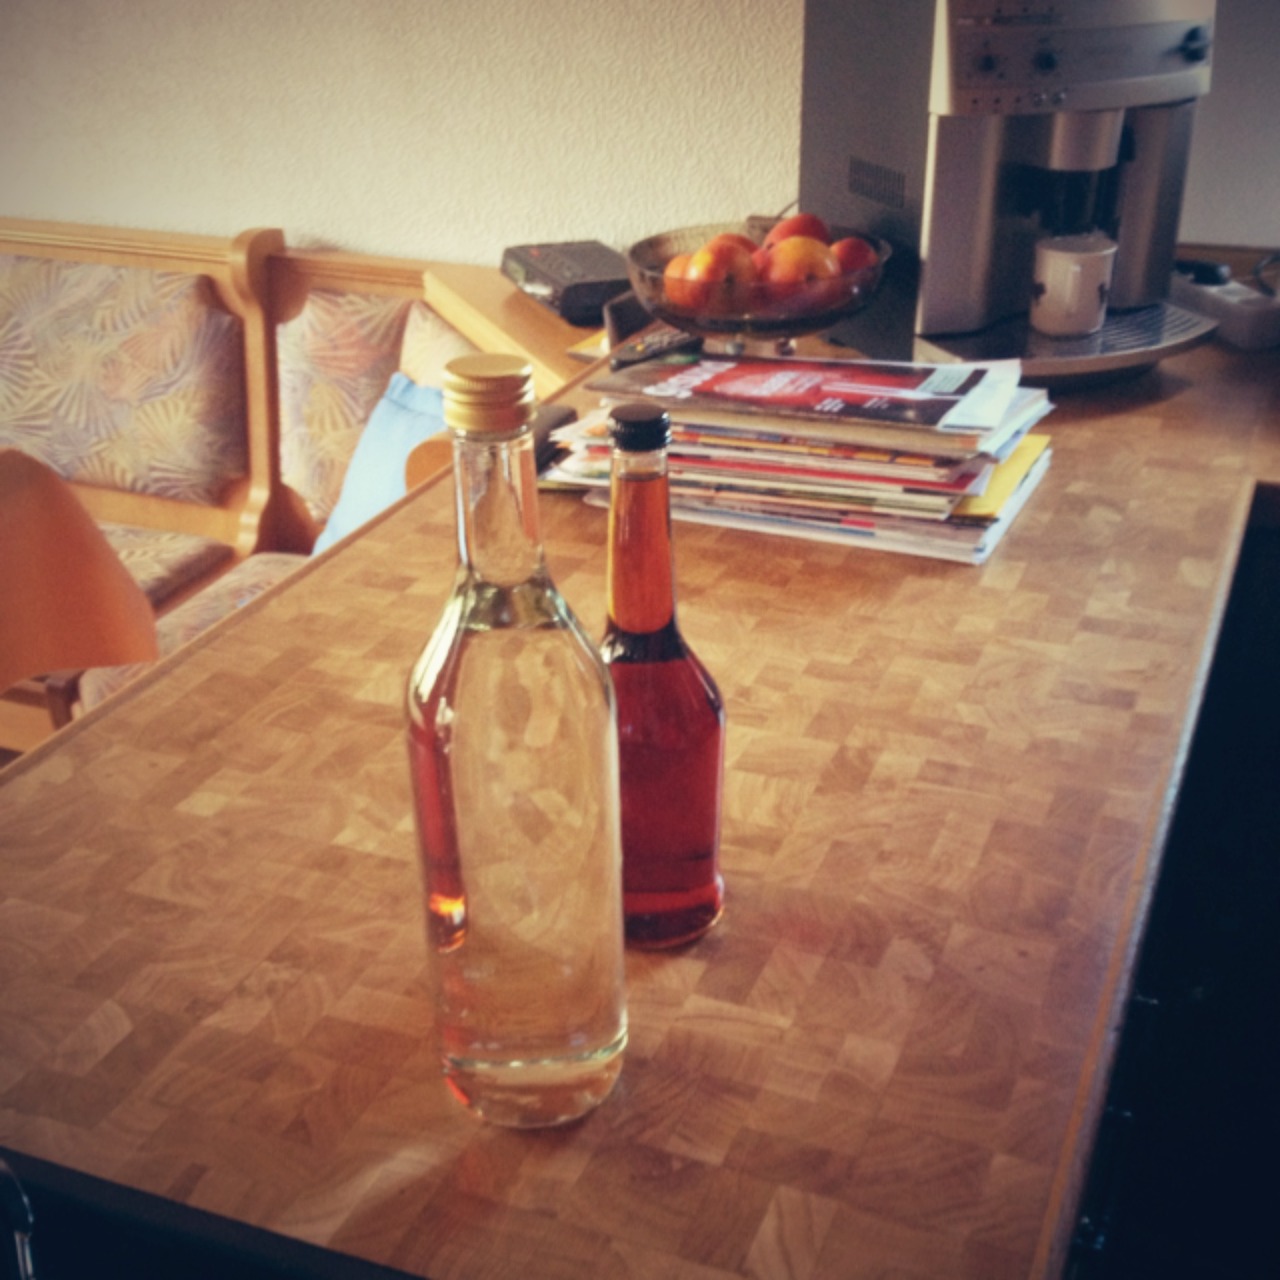 some bottles of oil and a glass bottle are sitting on the kitchen table